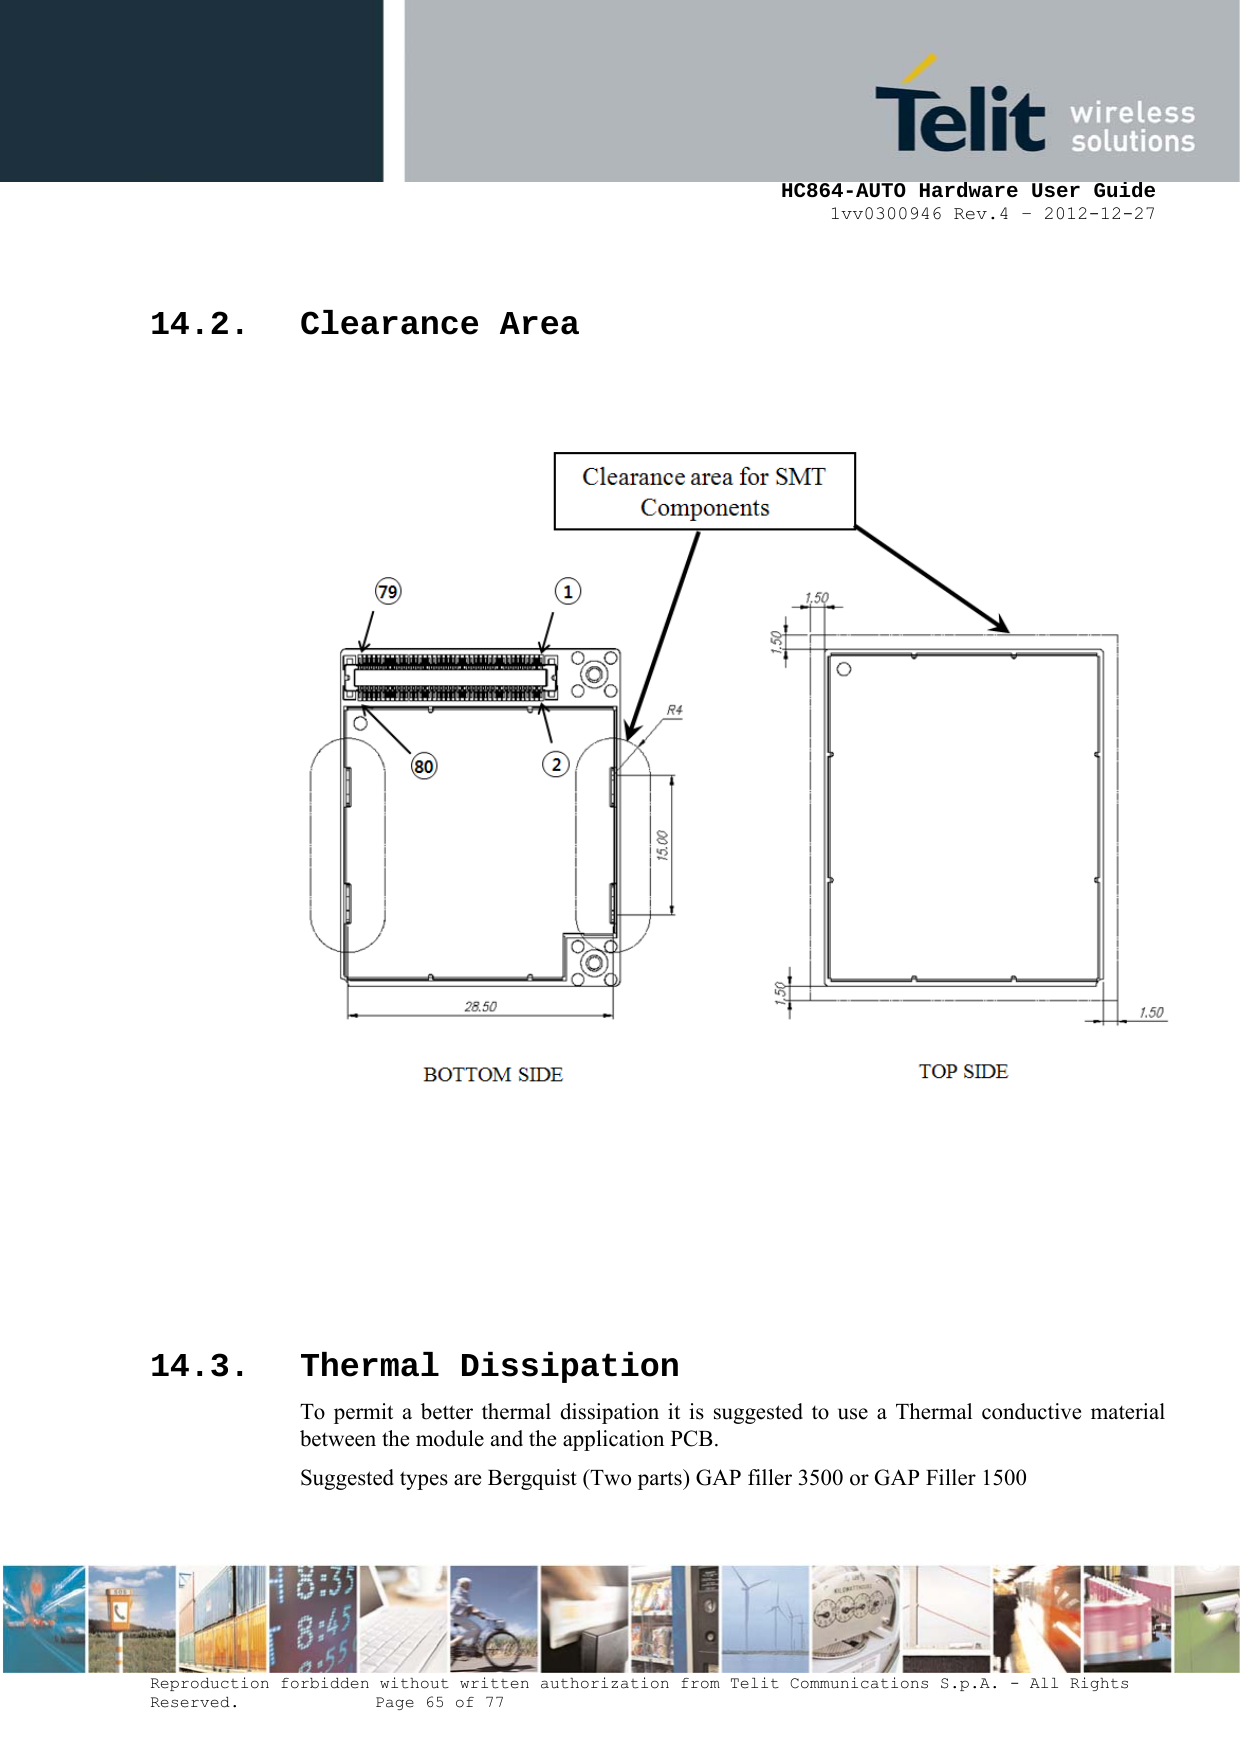     HC864-AUTO Hardware User Guide 1vv0300946 Rev.4 – 2012-12-27 Reproduction forbidden without written authorization from Telit Communications S.p.A. - All Rights Reserved.    Page 65 of 77   14.2. Clearance Area          14.3. Thermal Dissipation To permit a better thermal dissipation it is suggested to use a Thermal conductive material between the module and the application PCB. Suggested types are Bergquist (Two parts) GAP filler 3500 or GAP Filler 1500 